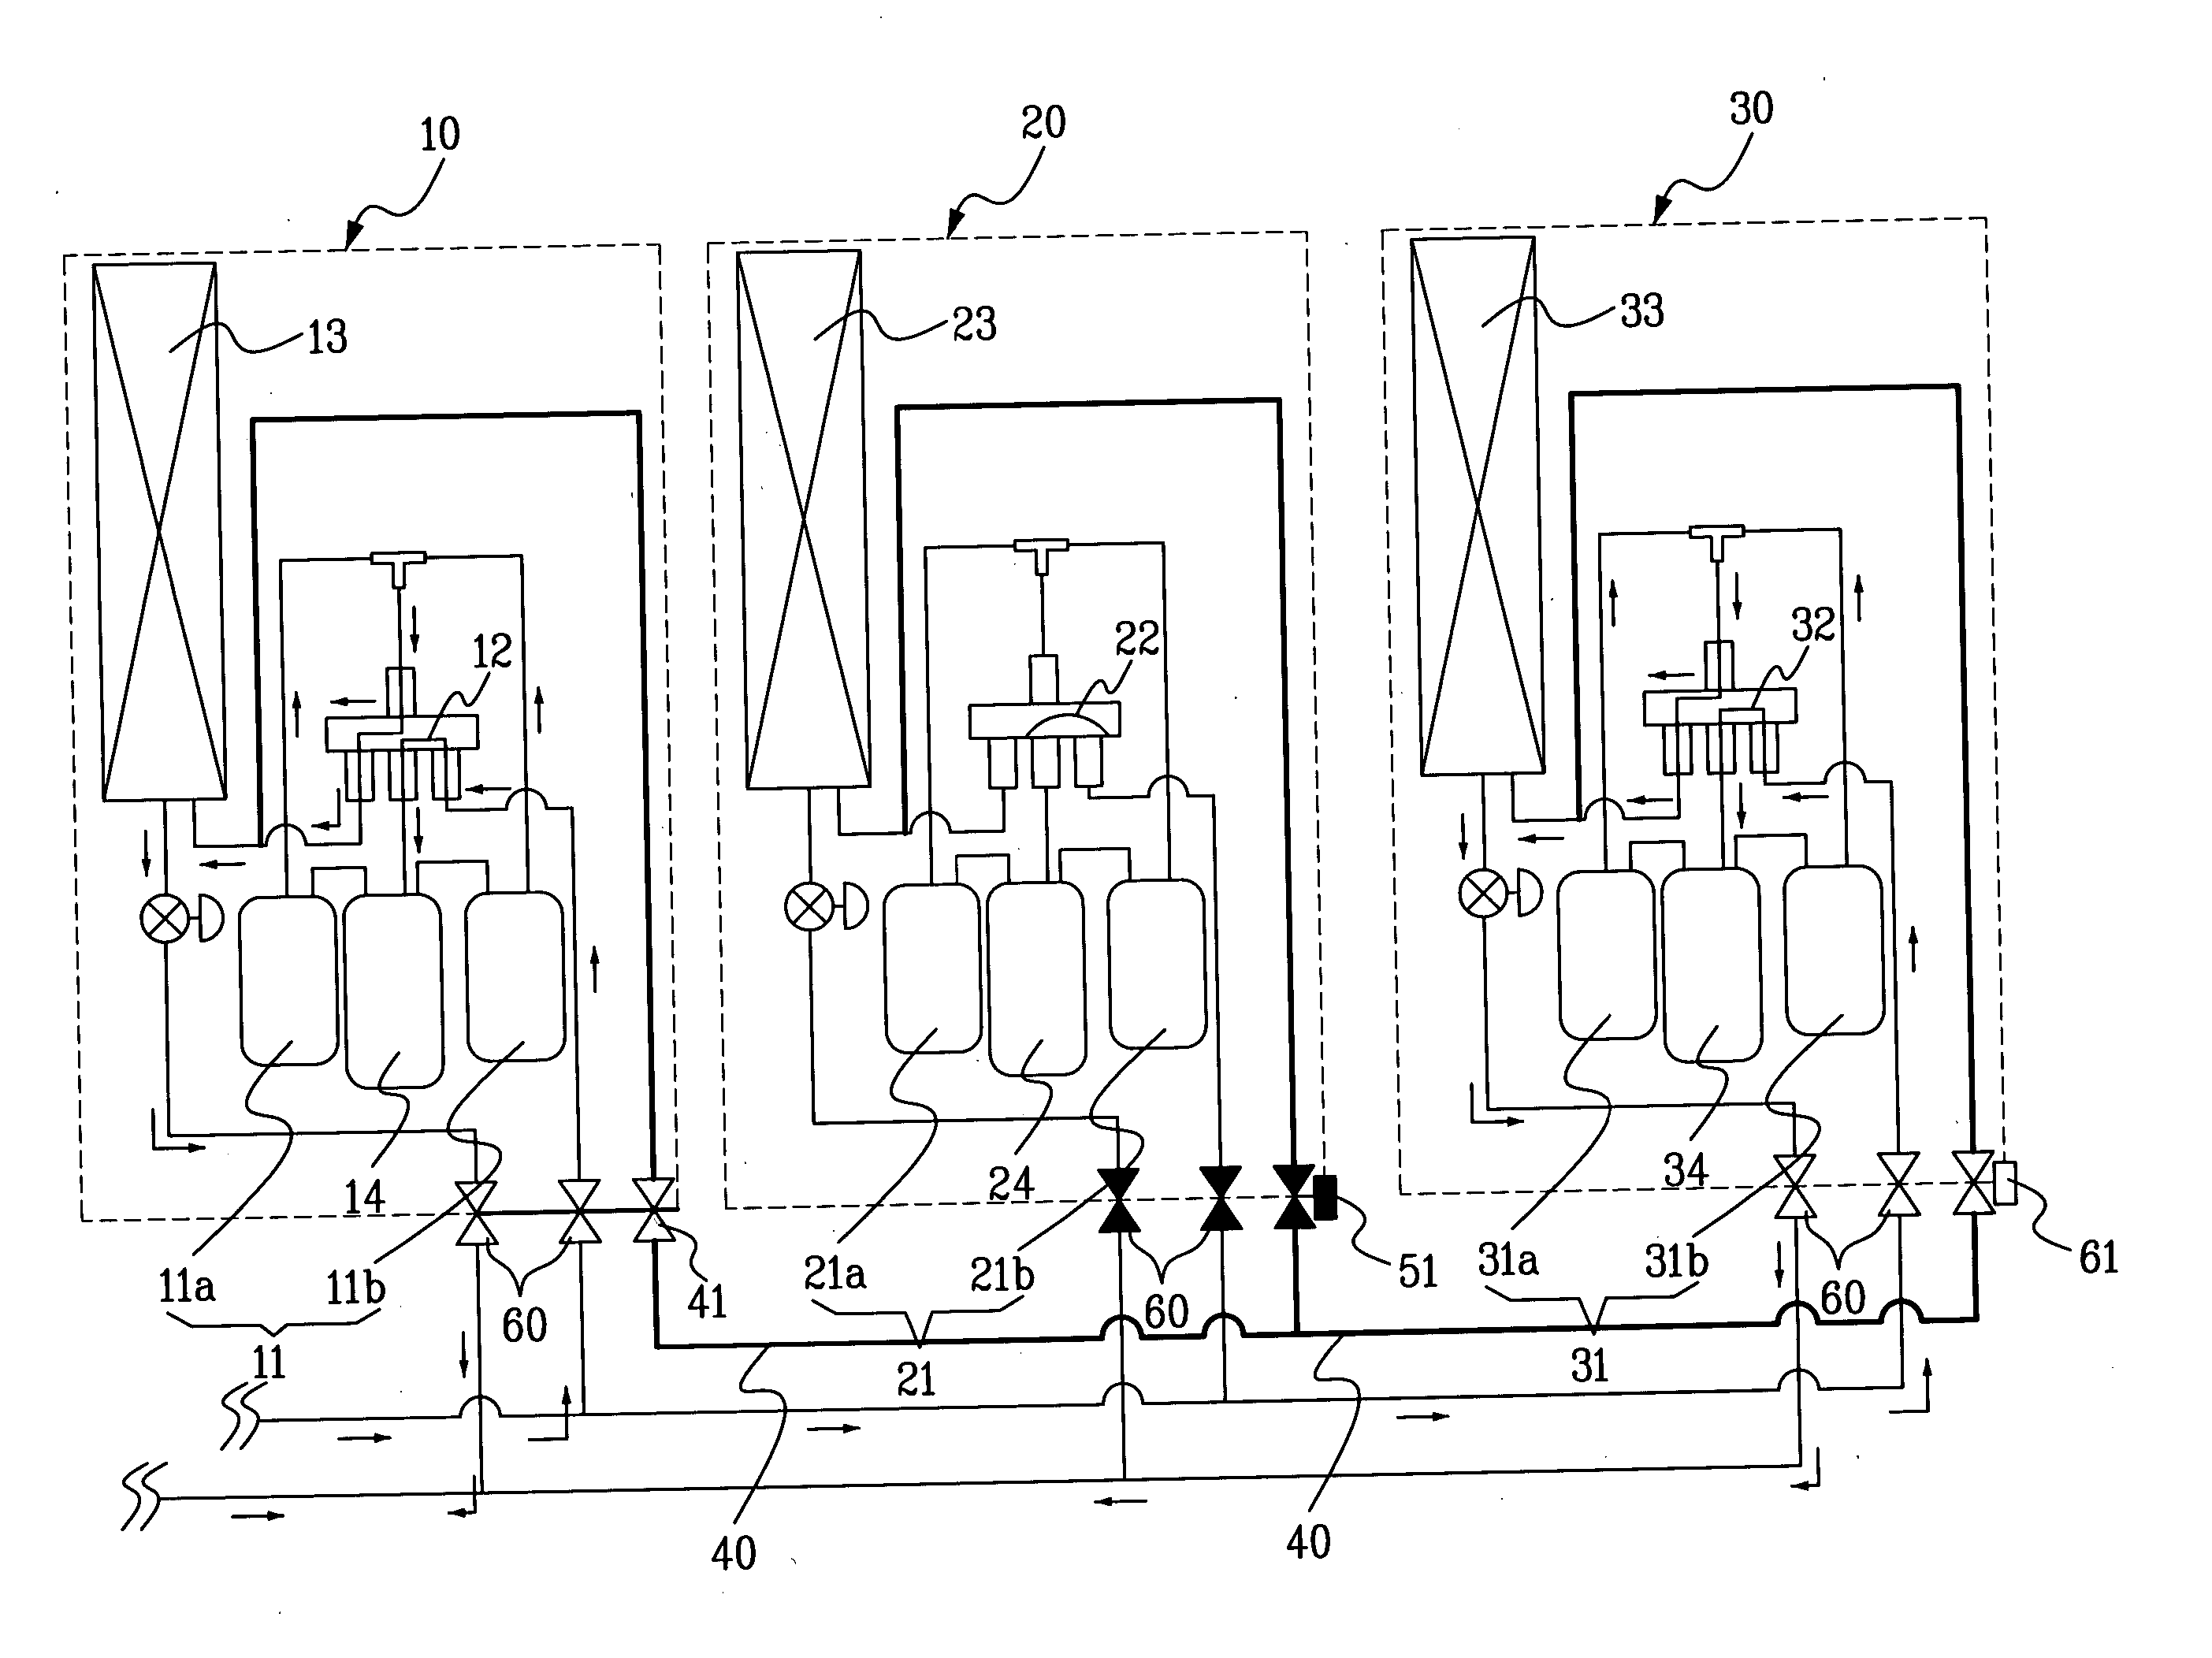 Multi-air condition system and method for controlling the same